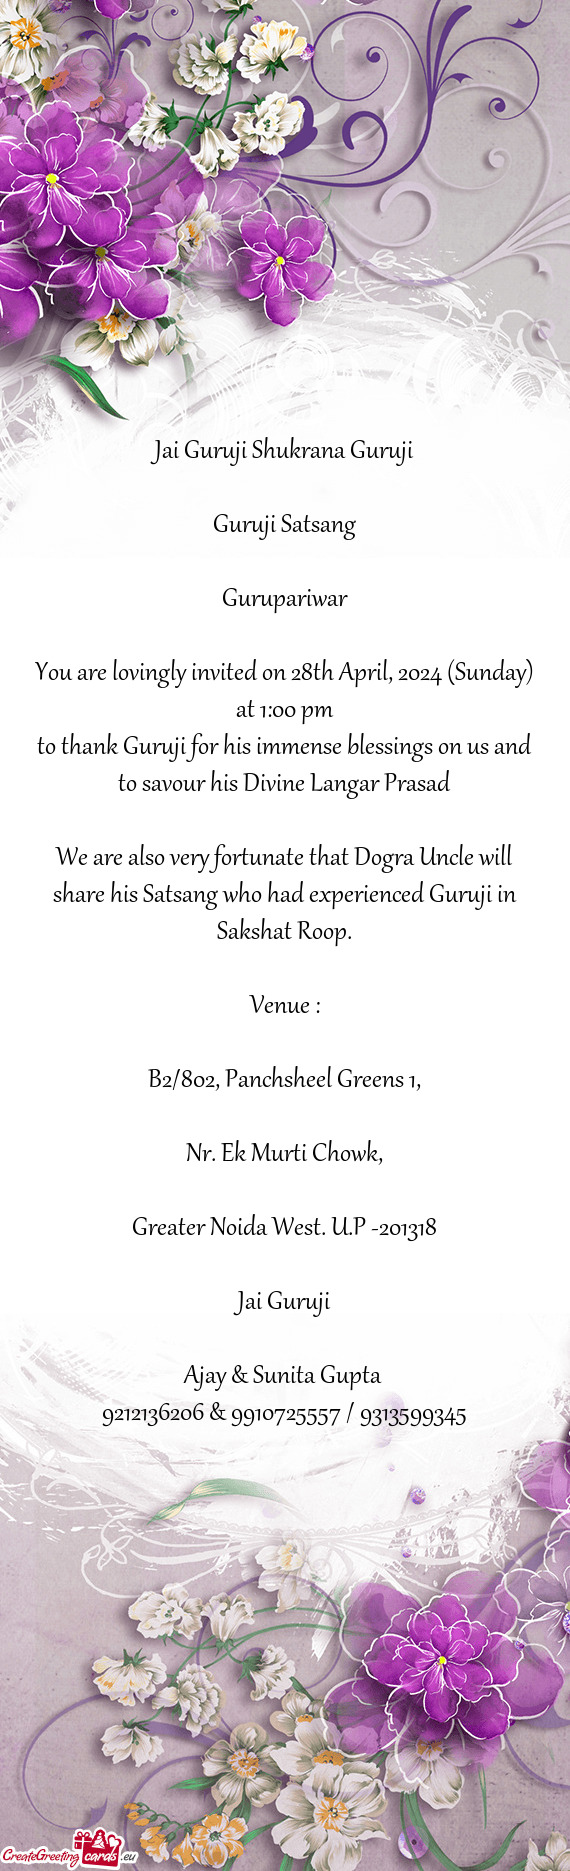 You are lovingly invited on 28th April, 2024 (Sunday) at 1:00 pm